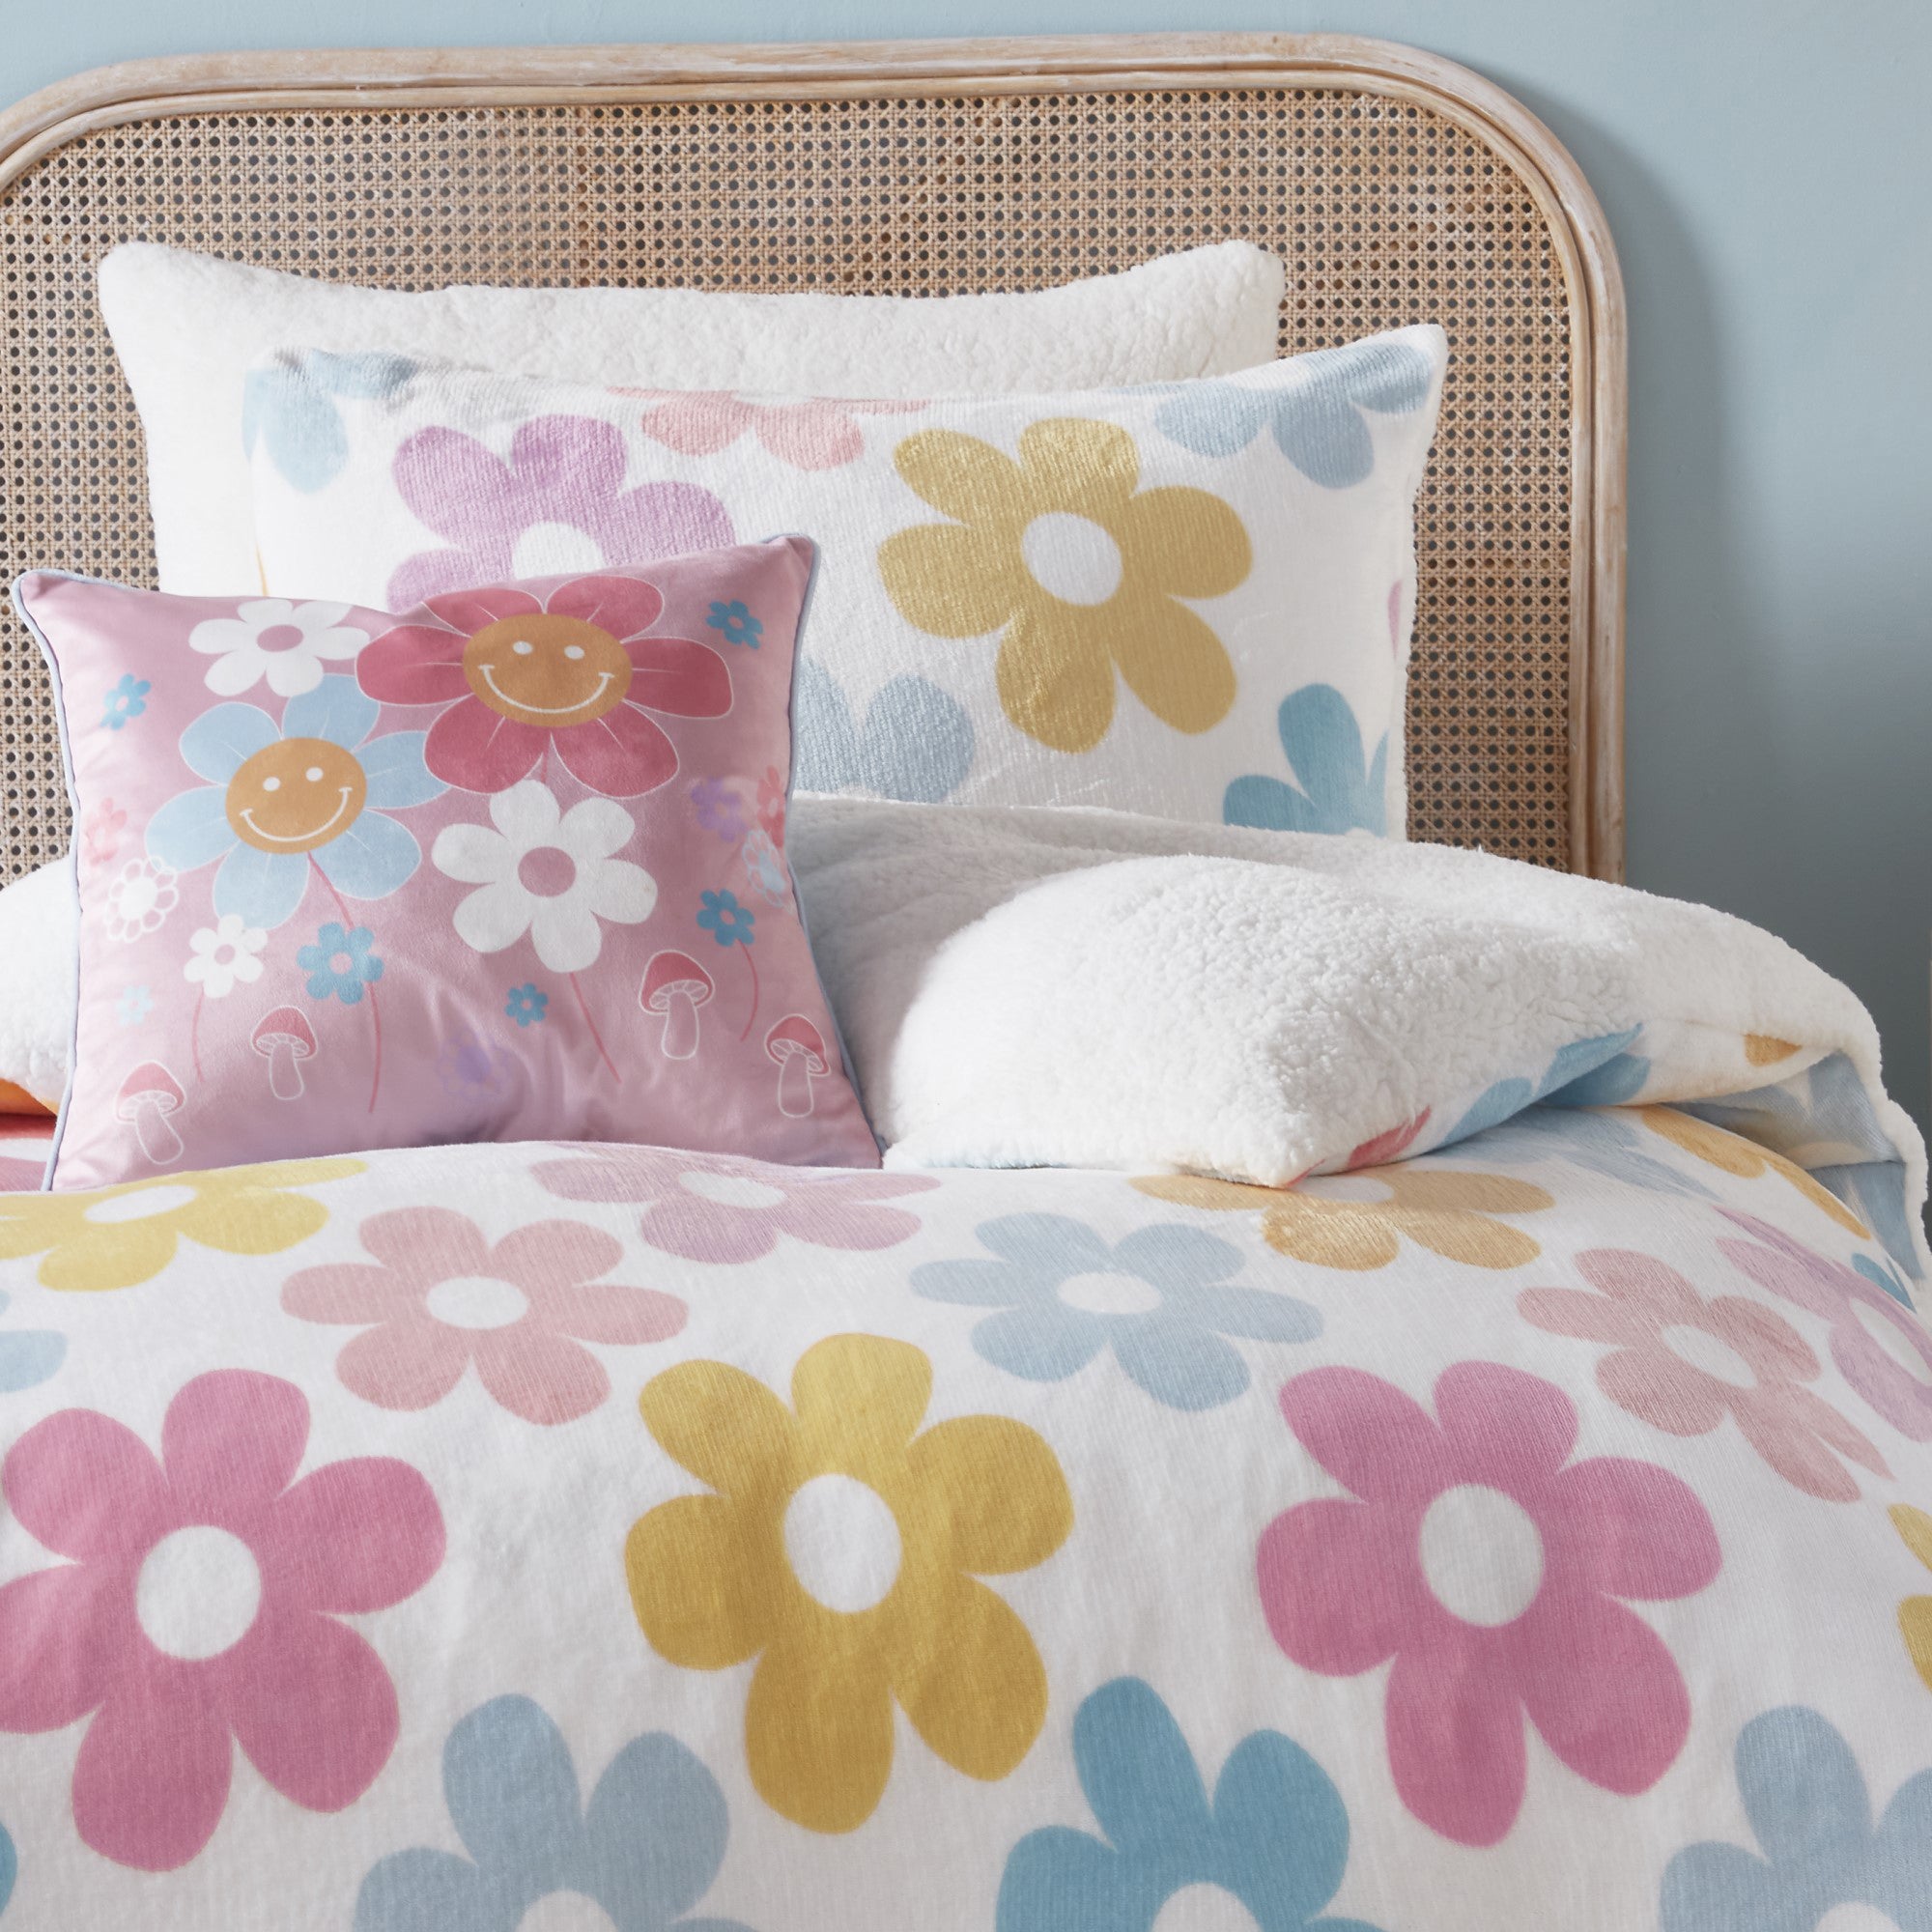 Filled Cushion Retro Flower by Bedlam in Pink